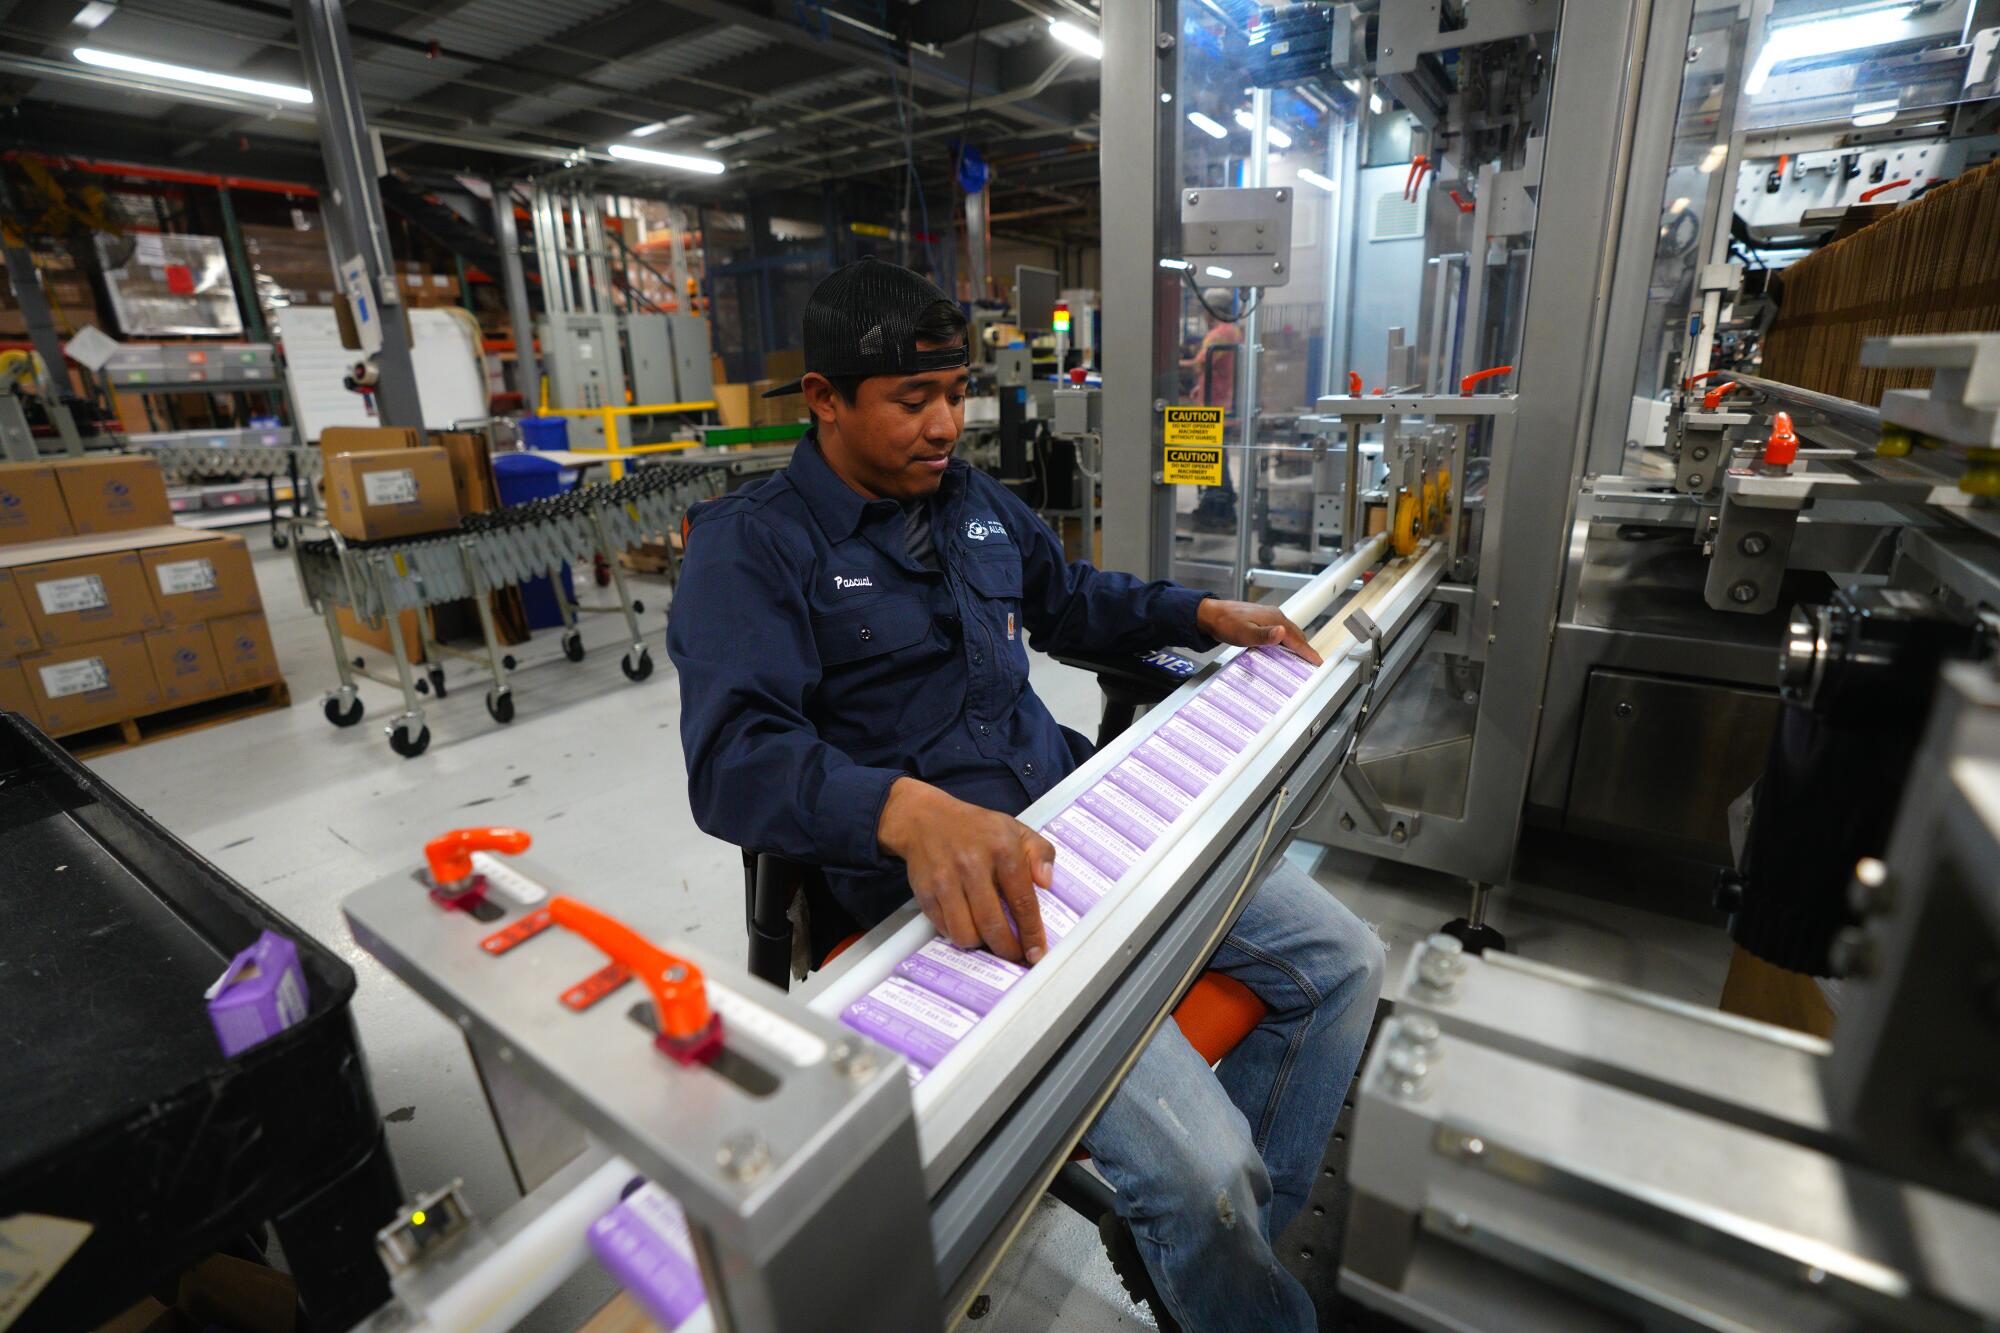 A man checking bars of soap with lavender labels as they come down a production line in a factory